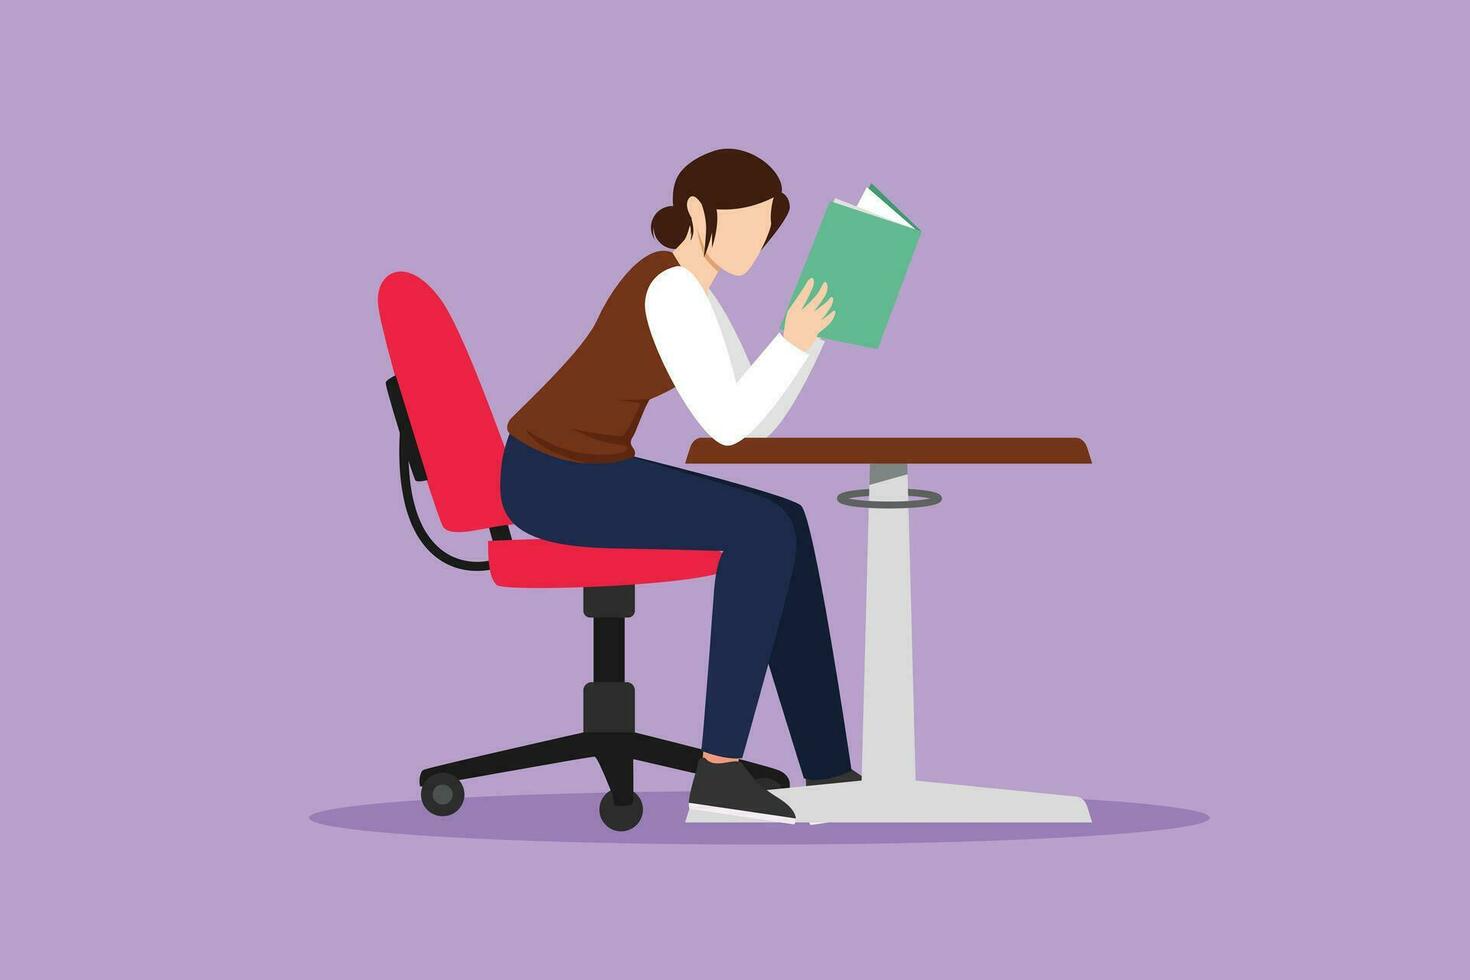 Cartoon flat style drawing girl student reading book in library or bookshop and sitting on chair at table. People read and study education or pupil learning lesson. Graphic design vector illustration